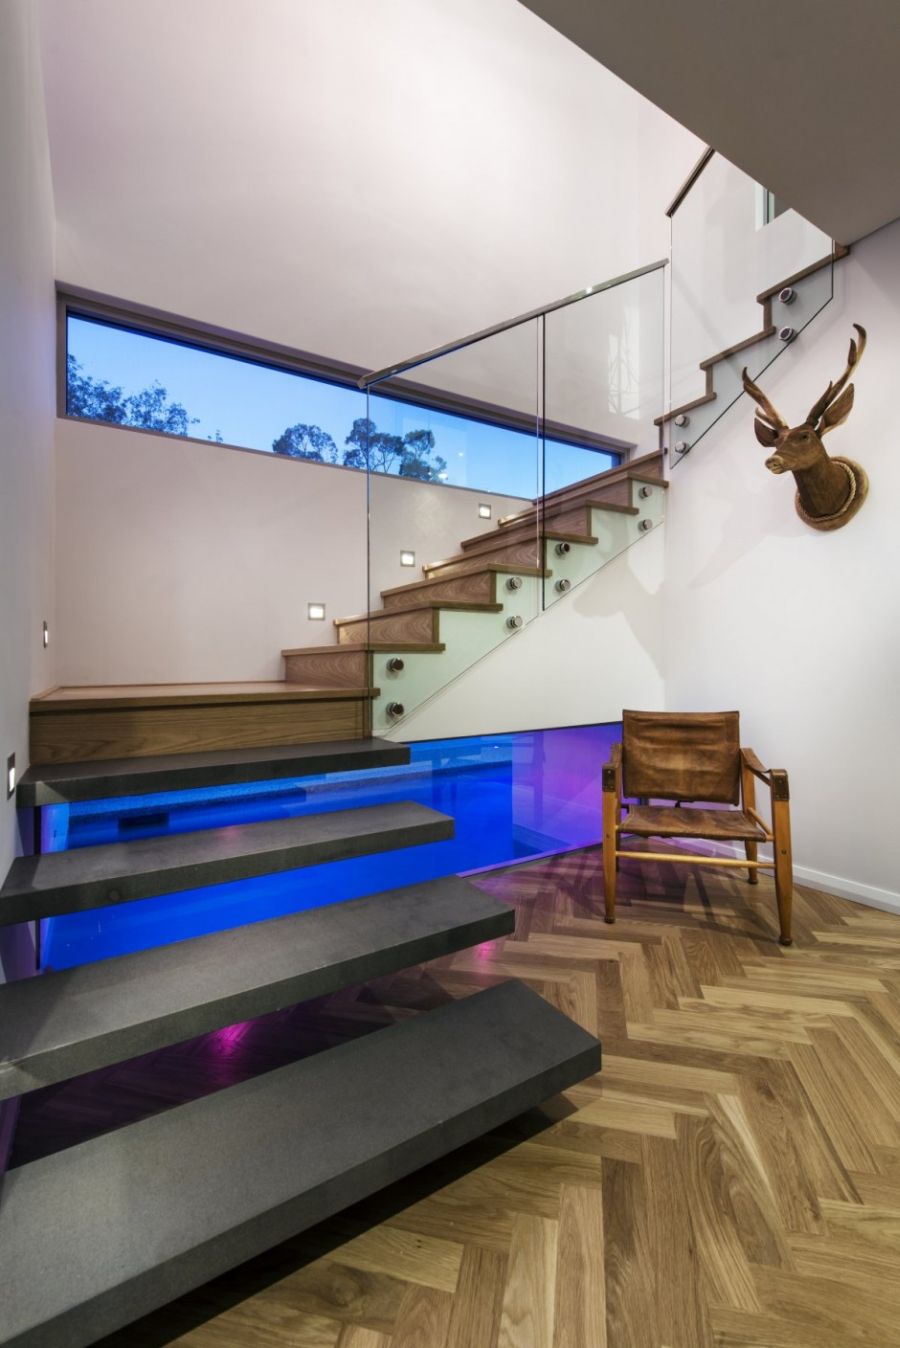 Floating staircase with glass railing